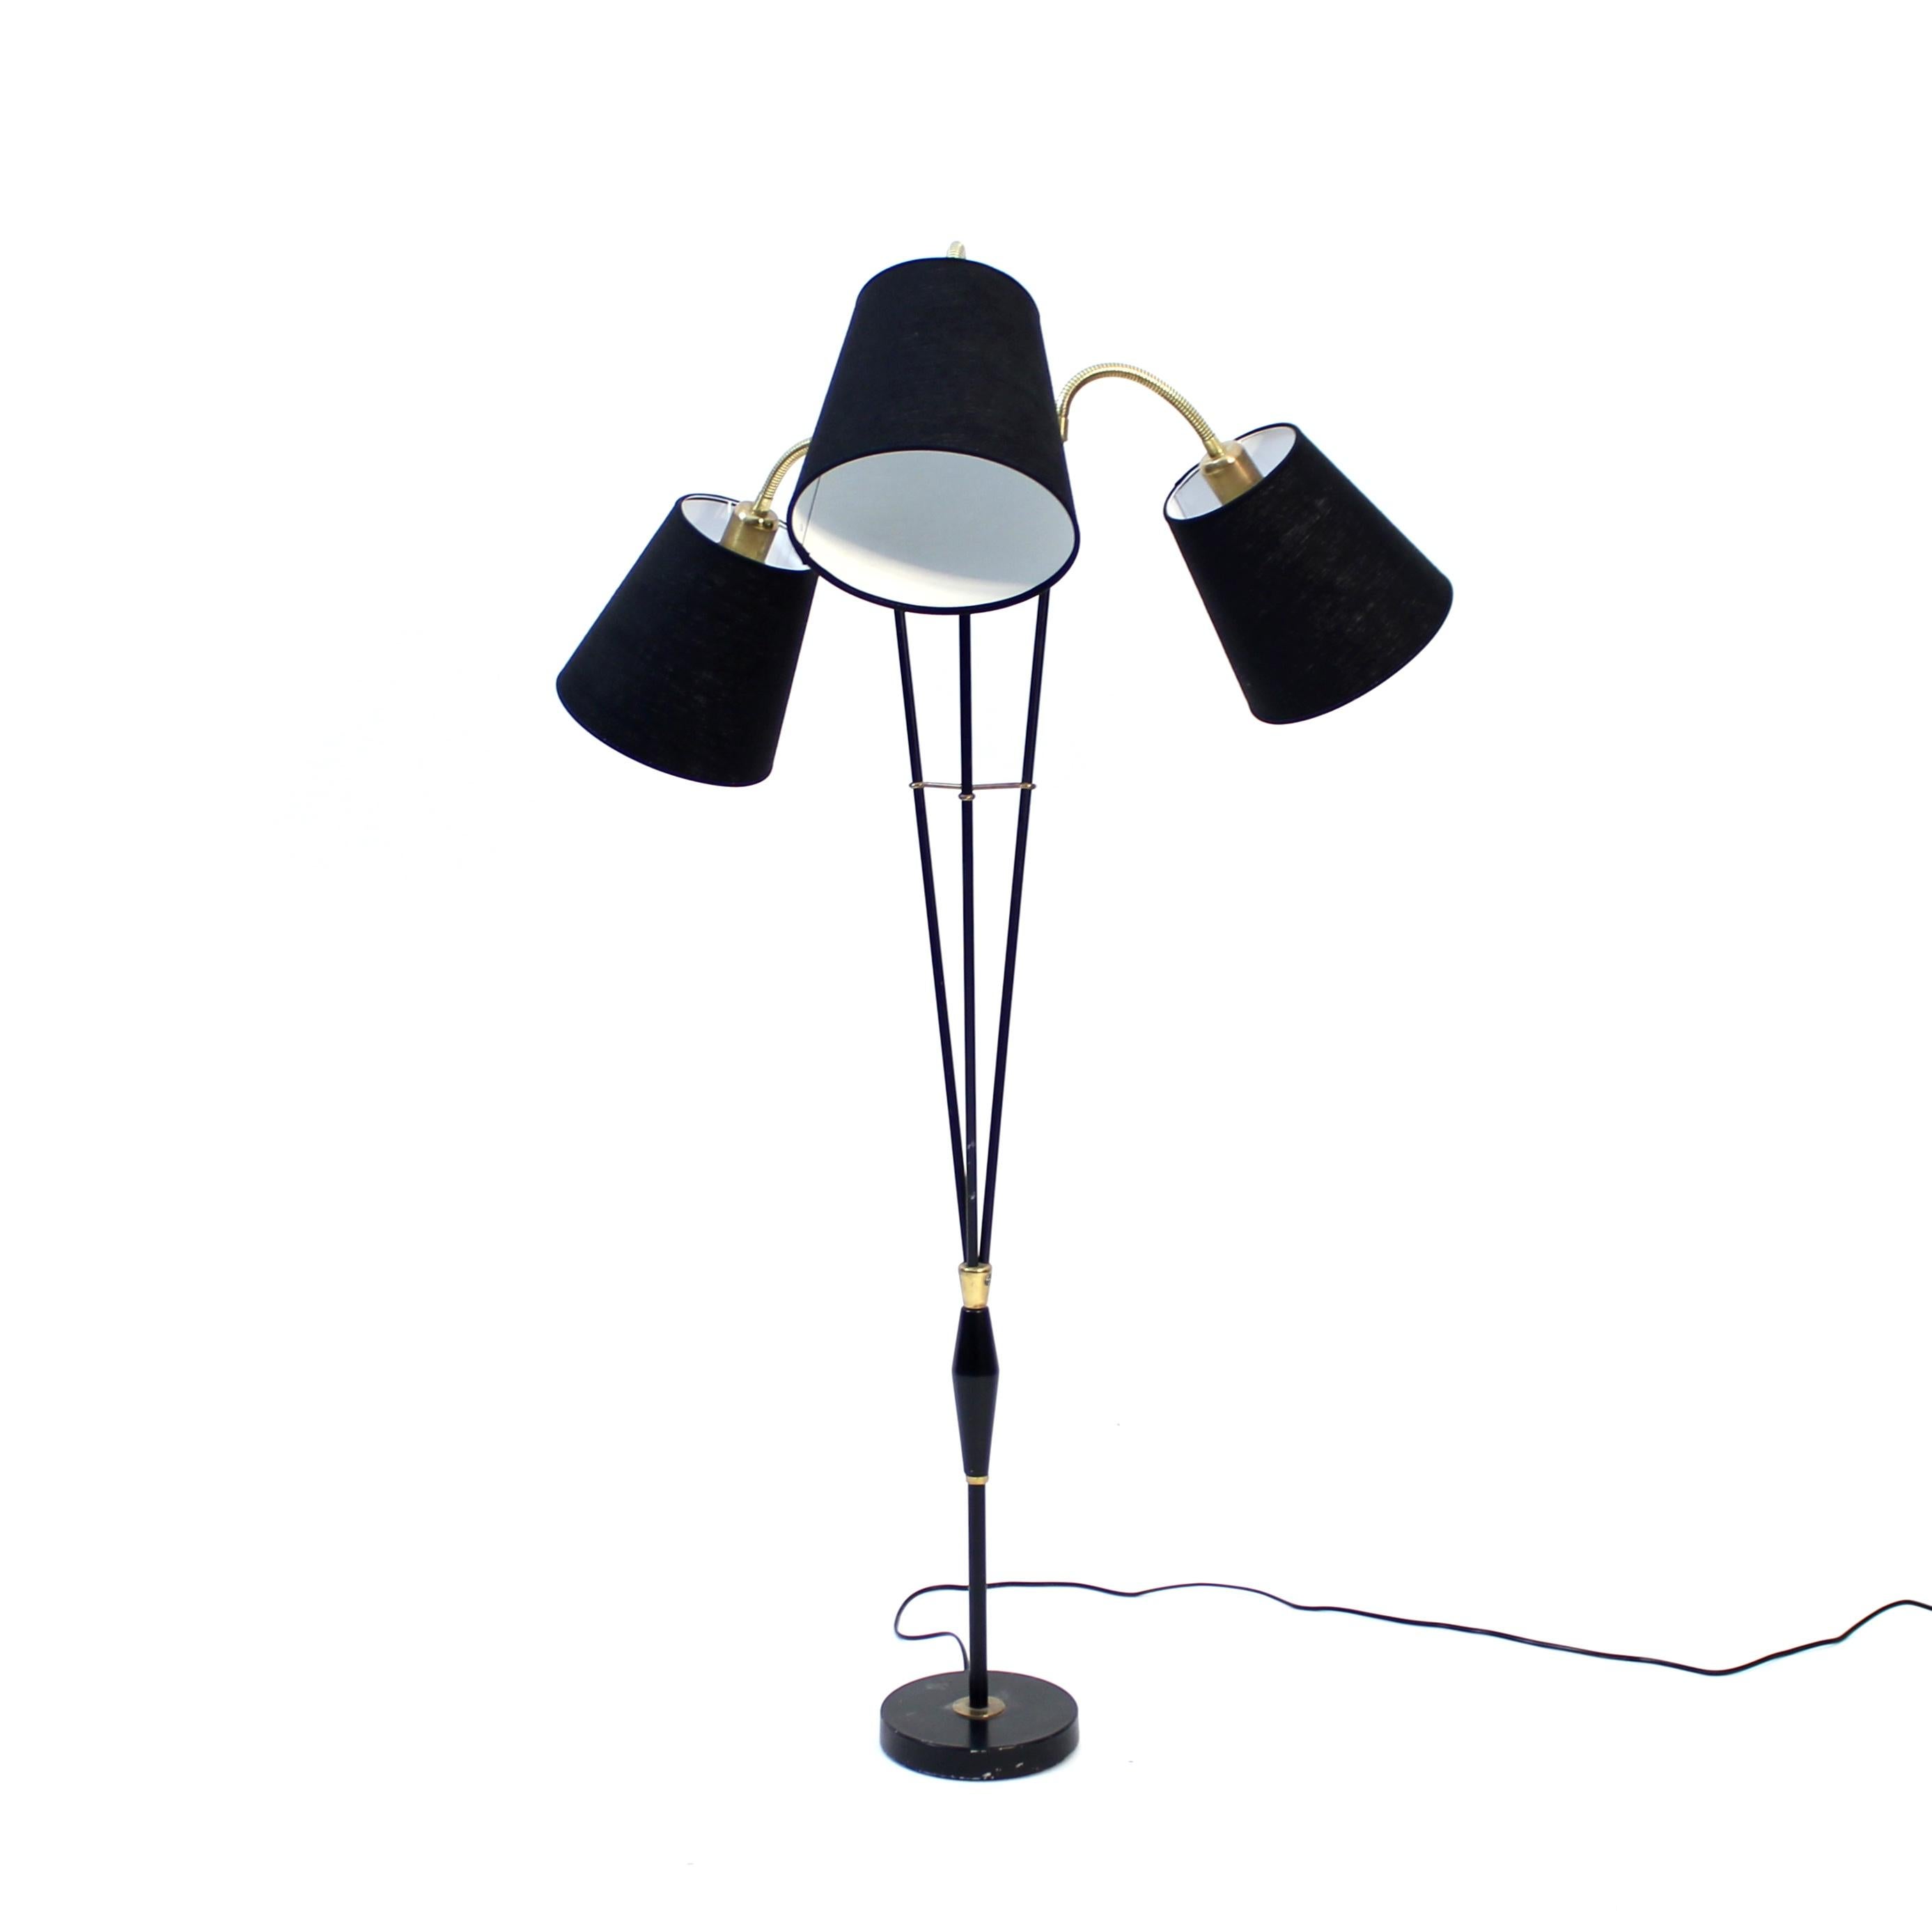 Swedish mid-century floor lamp with three adjustable swan neck light sources, mounted on different heights. Black metal stem with brass details. Fitted with three new black shades. Good and honest vintage condition with light ware consistent with